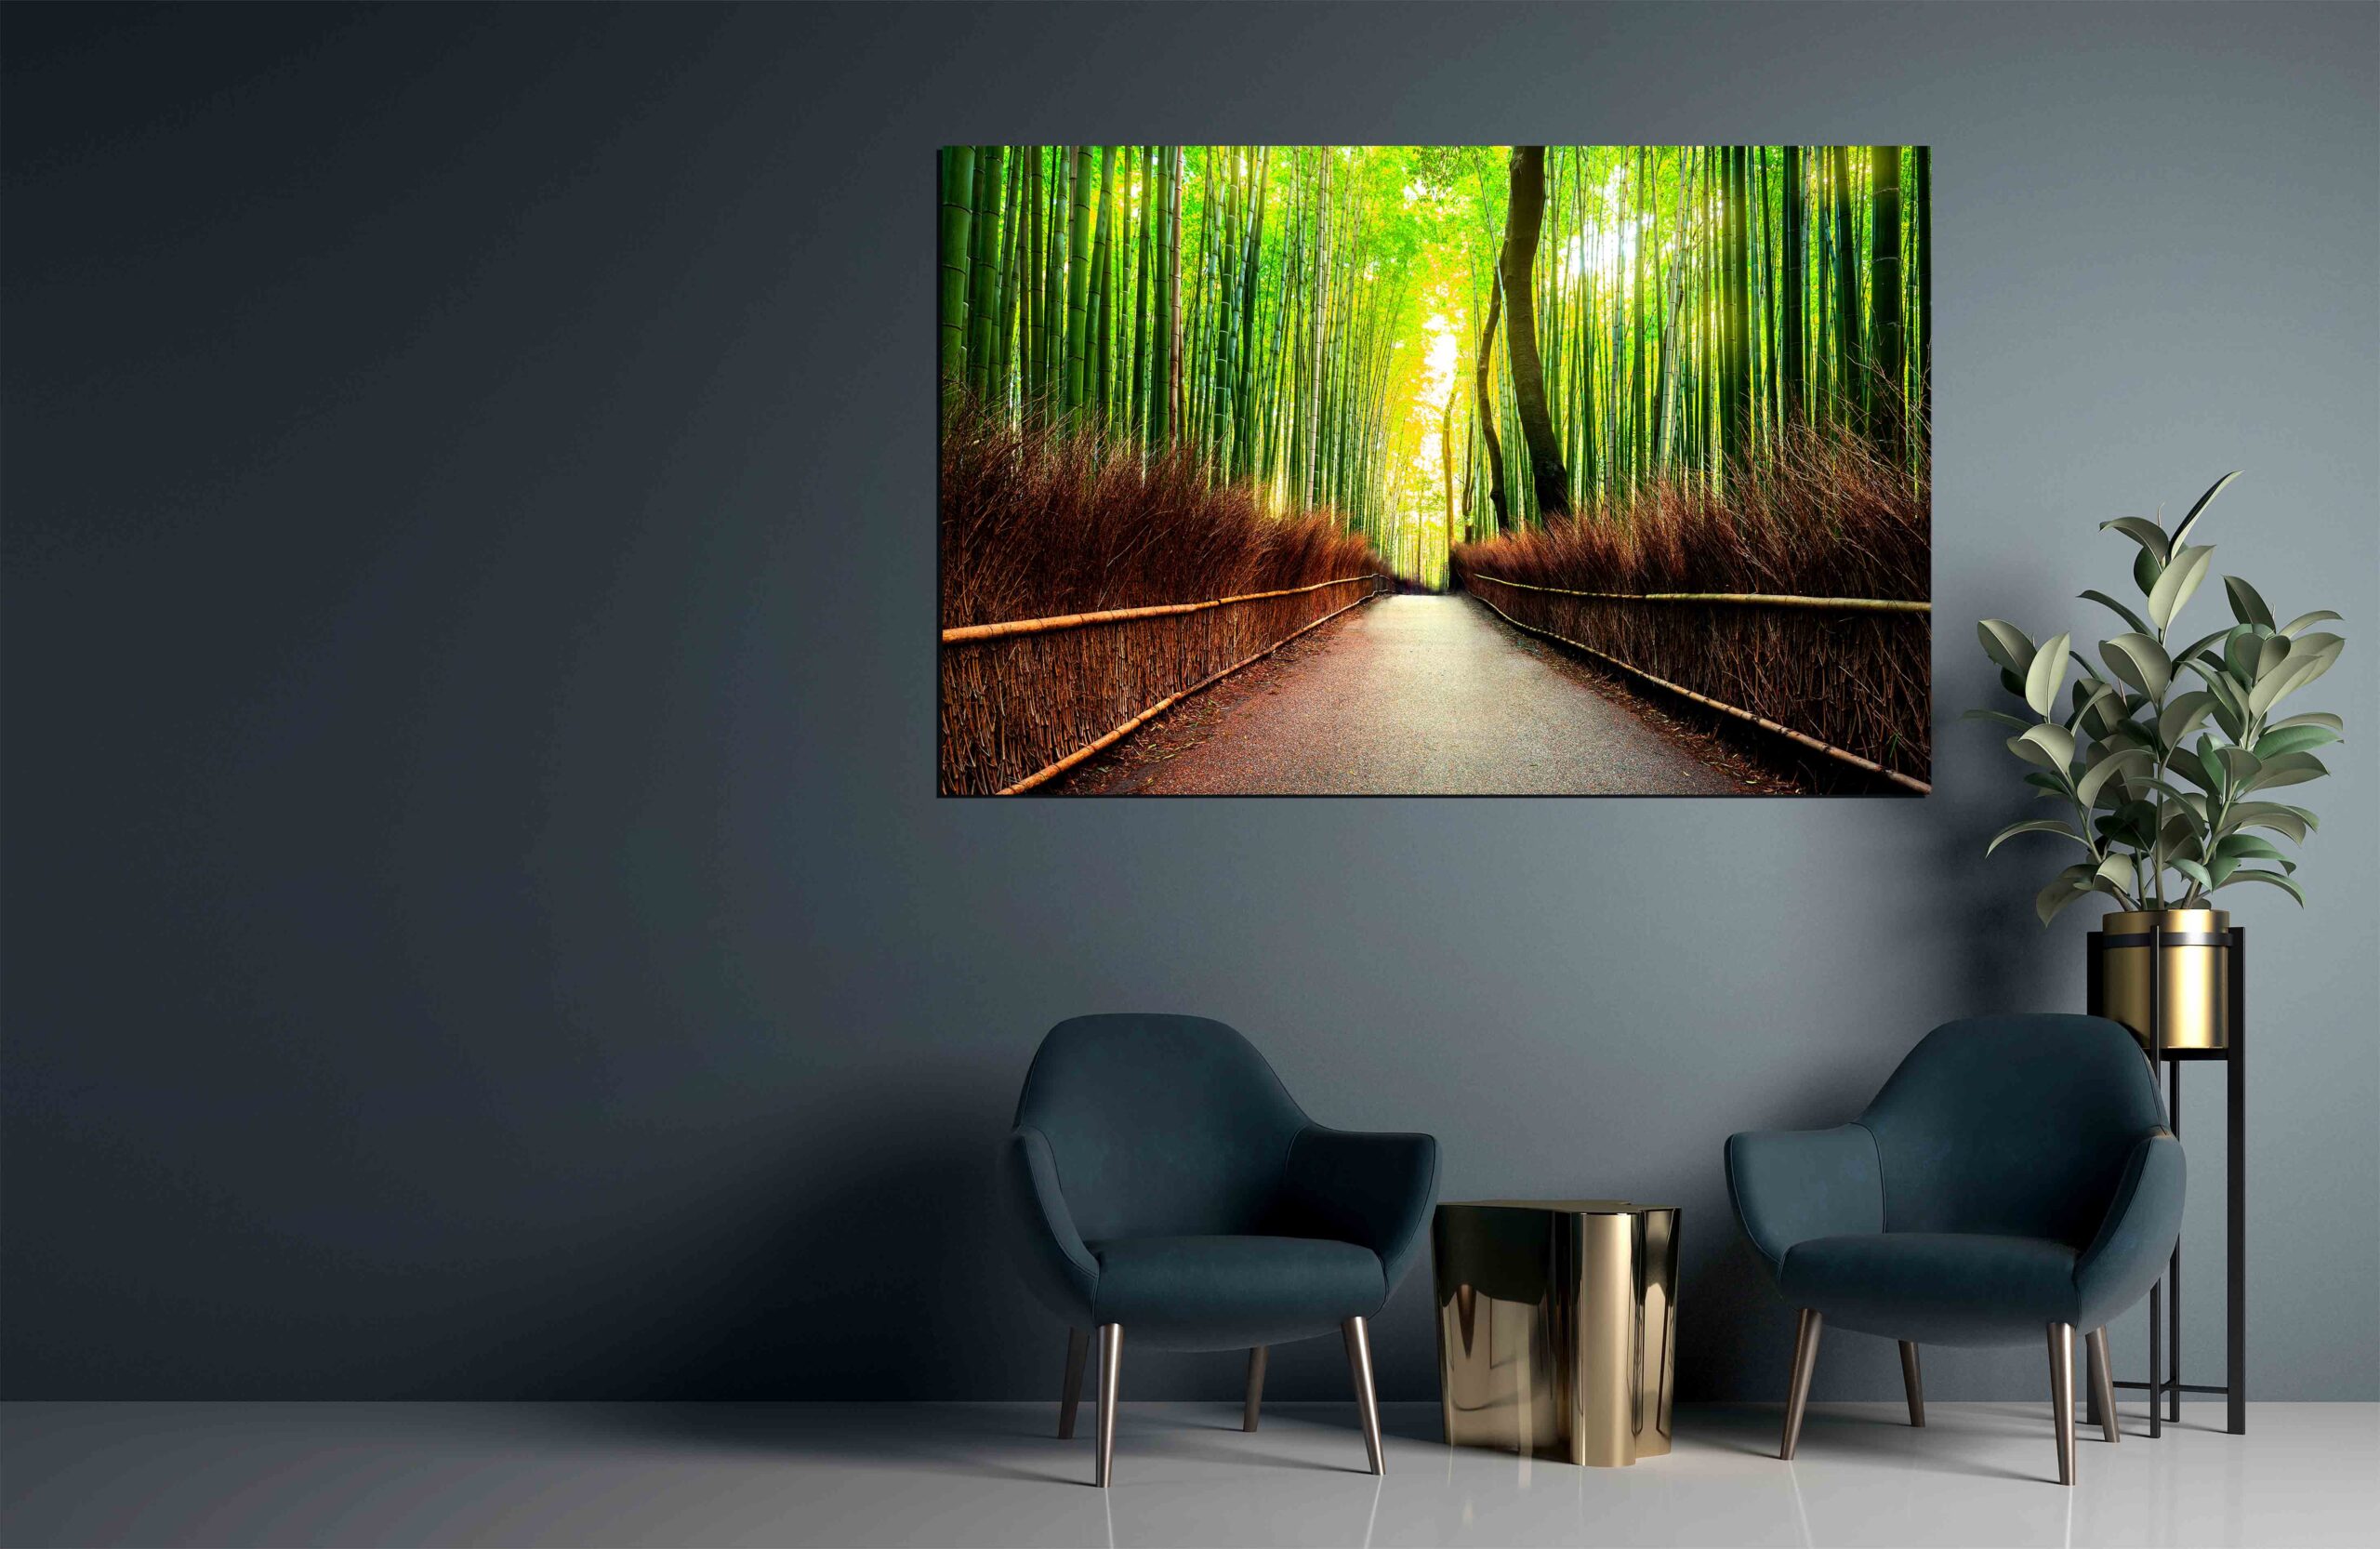 Road in Bamboo forest